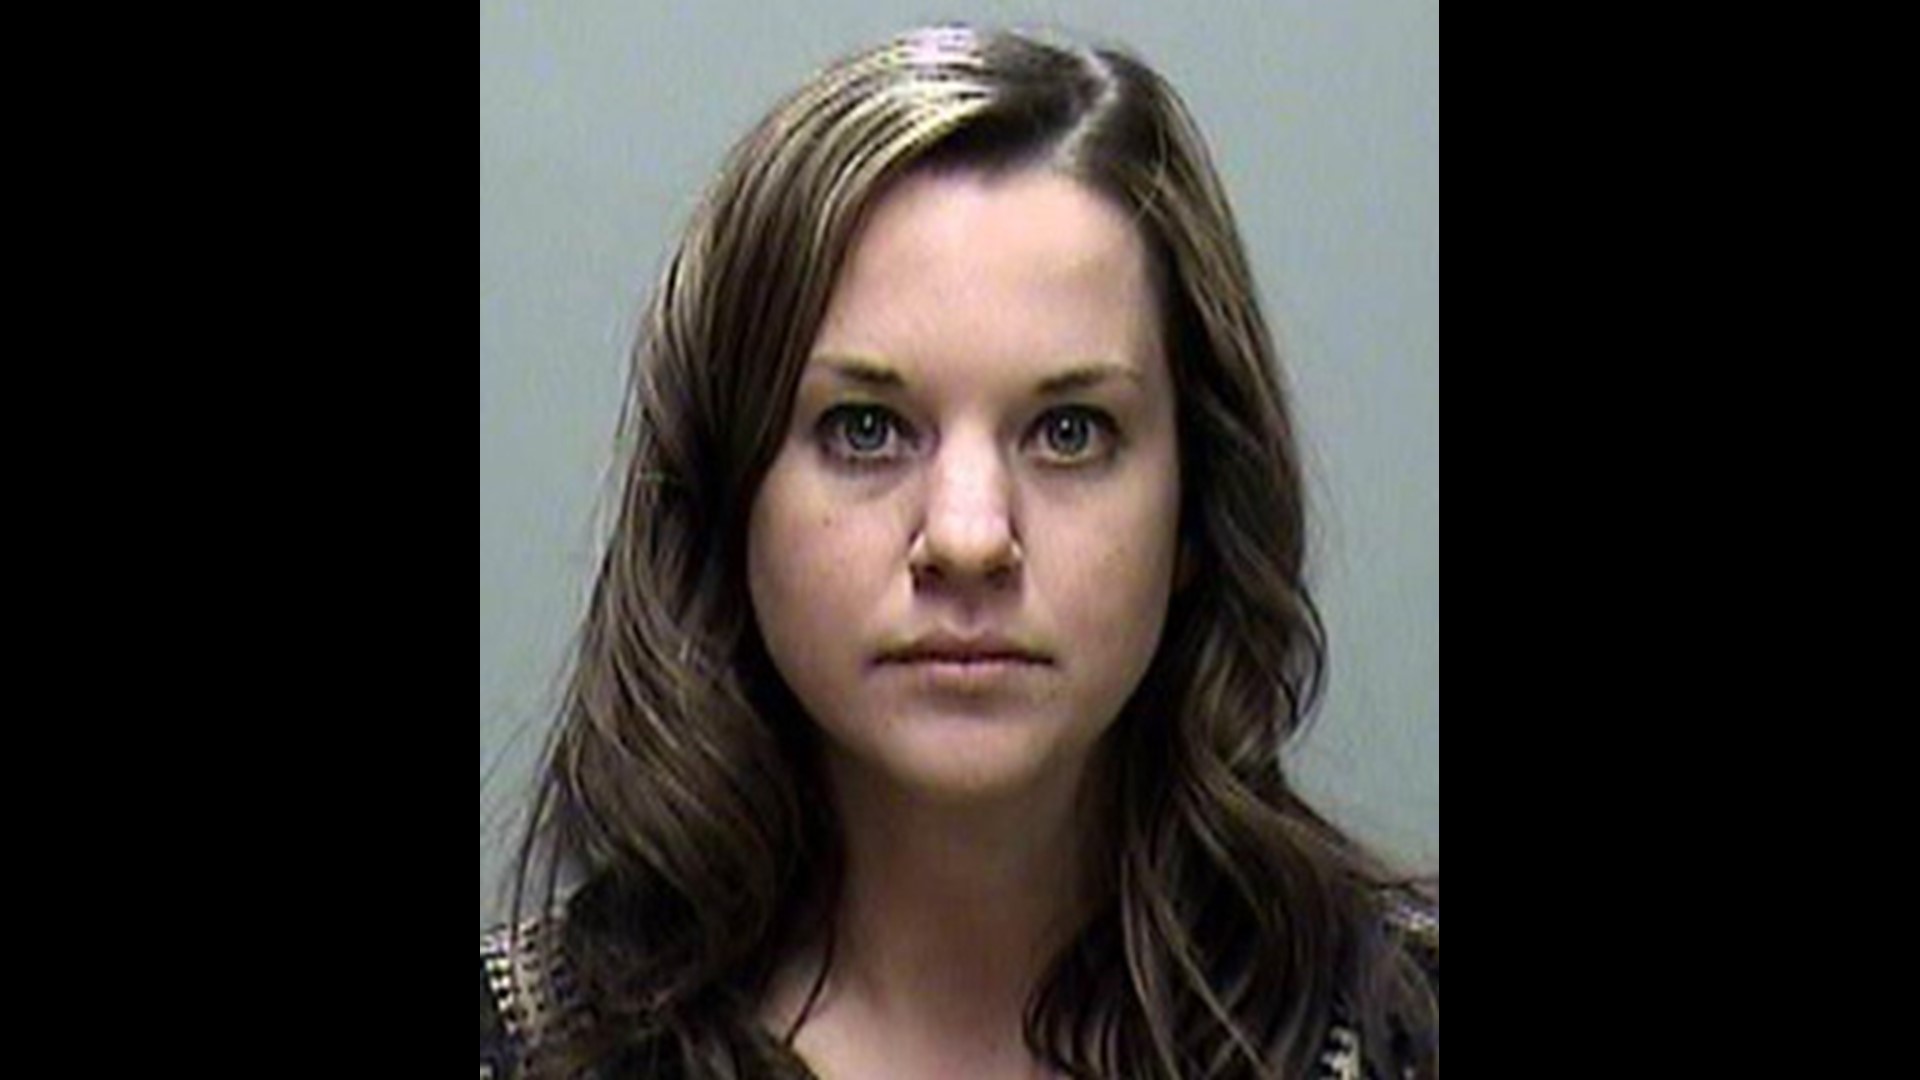 Teacher Admits To Sex With 16 Year Old Sent Selfies During Honeymoon